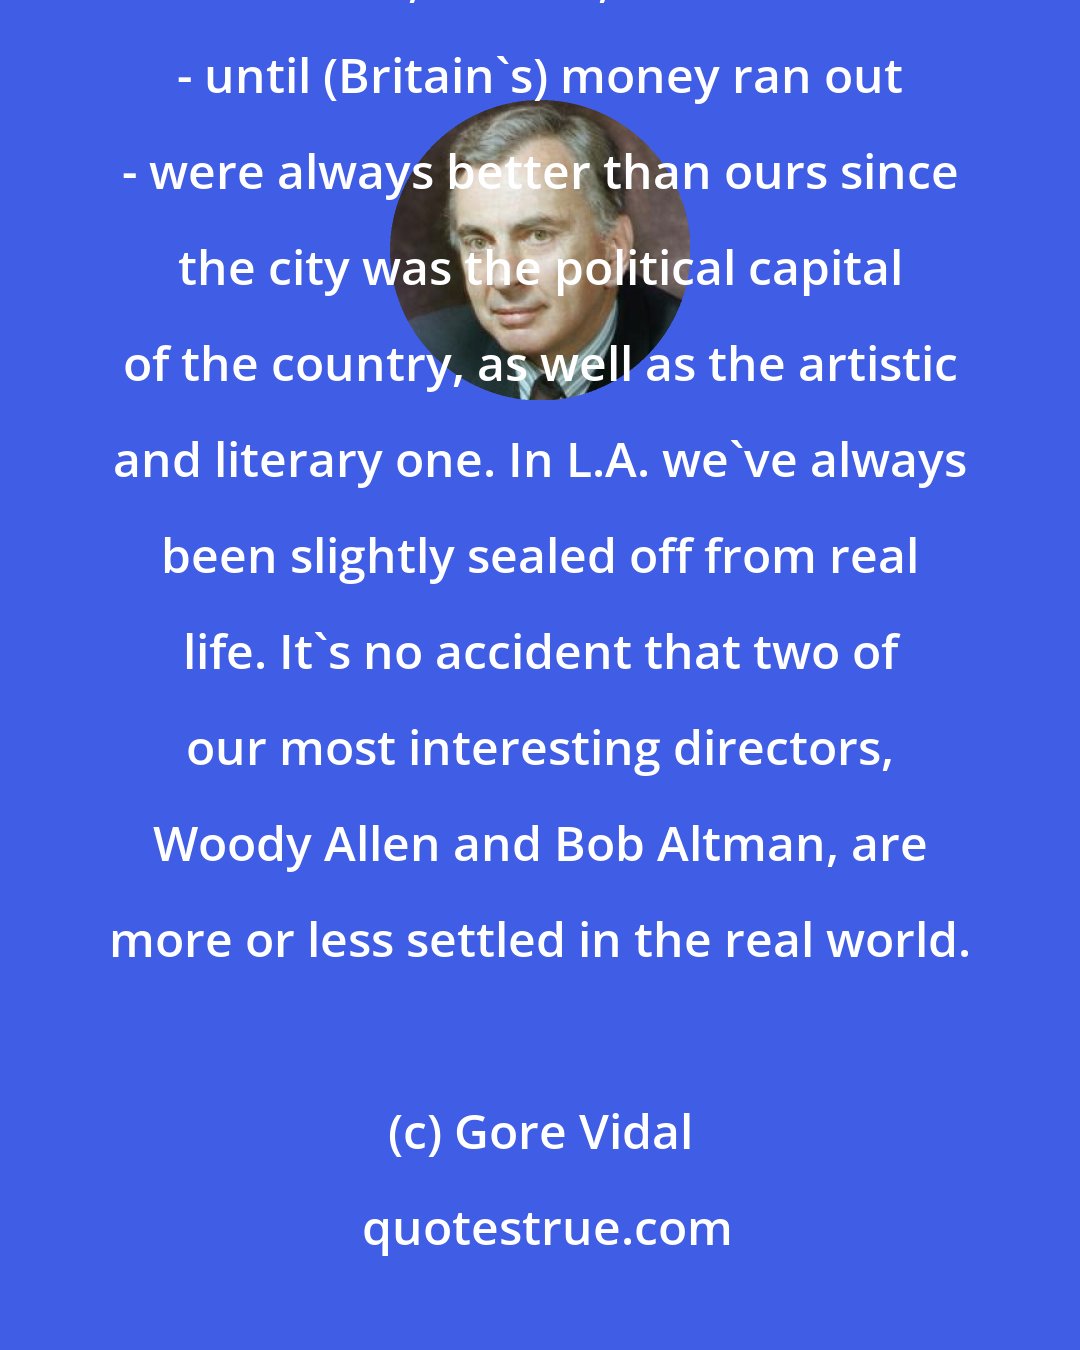 Gore Vidal: It was a pity that movies and live TV left New York for Hollywood. London theater, movies, television - until (Britain's) money ran out - were always better than ours since the city was the political capital of the country, as well as the artistic and literary one. In L.A. we've always been slightly sealed off from real life. It's no accident that two of our most interesting directors, Woody Allen and Bob Altman, are more or less settled in the real world.